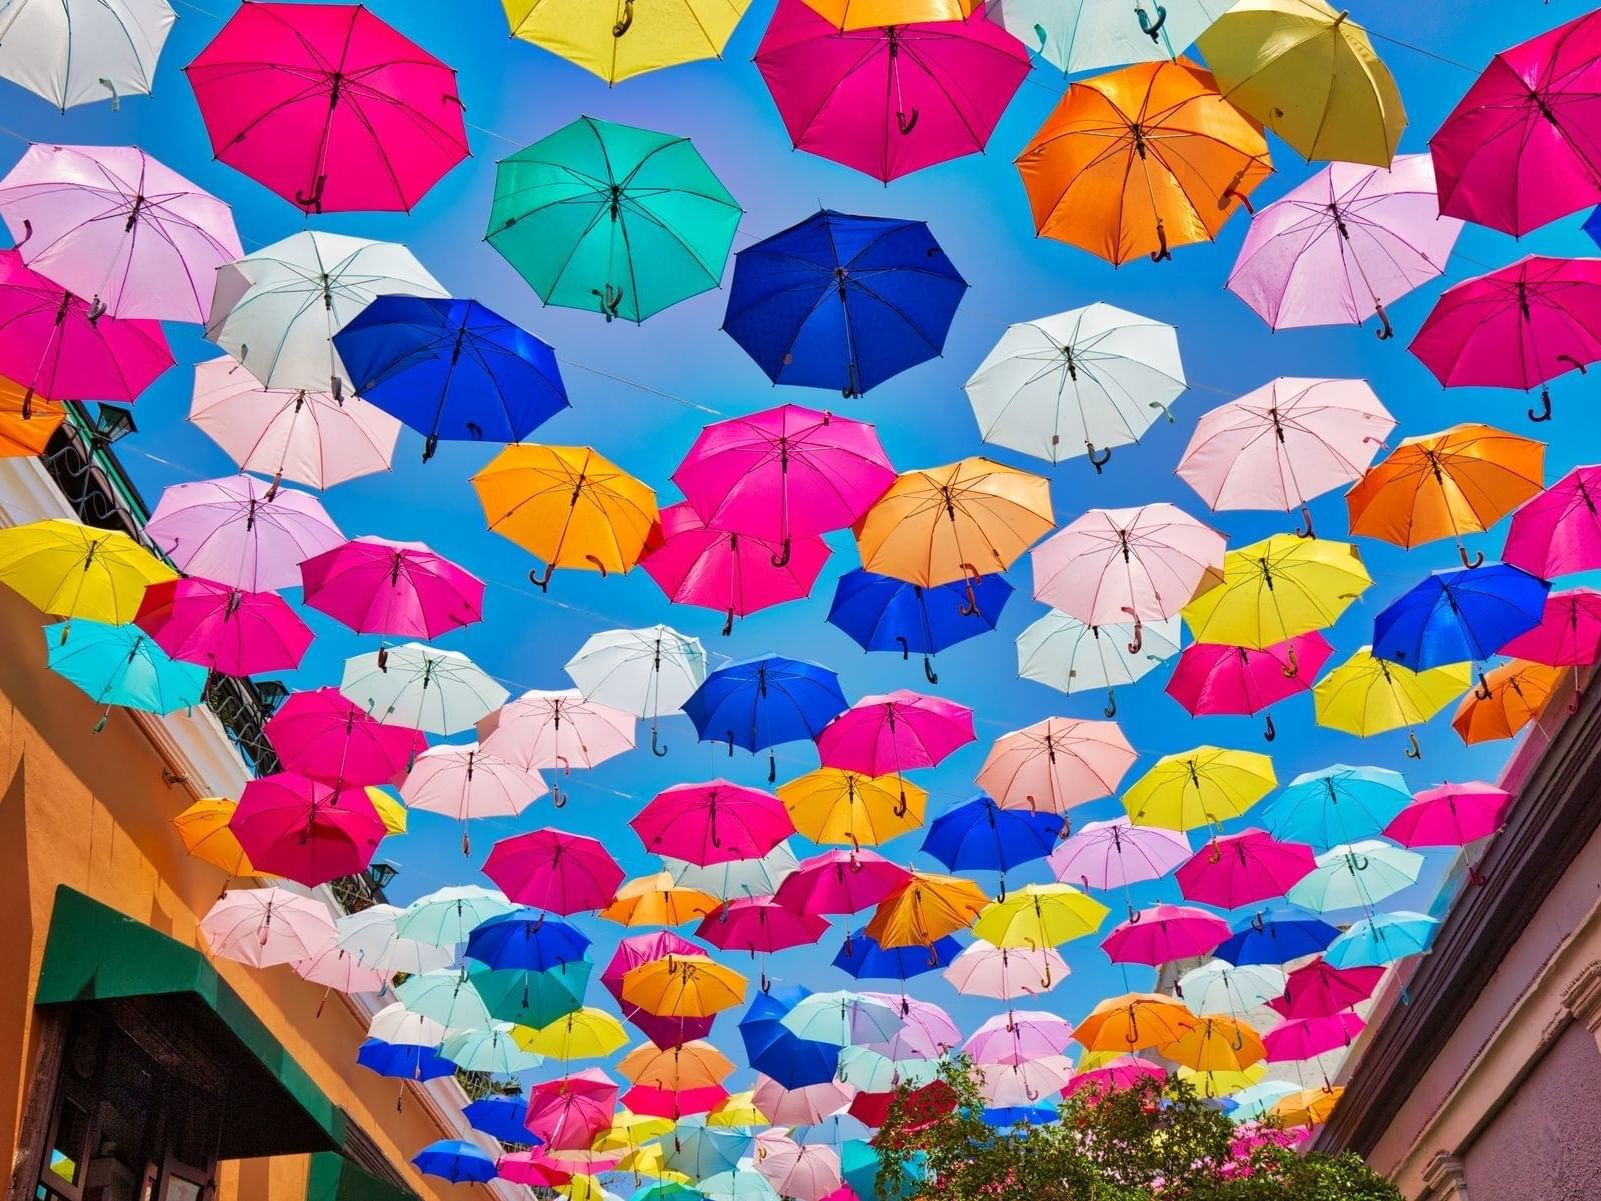 A street decorated with hanging umbrellas